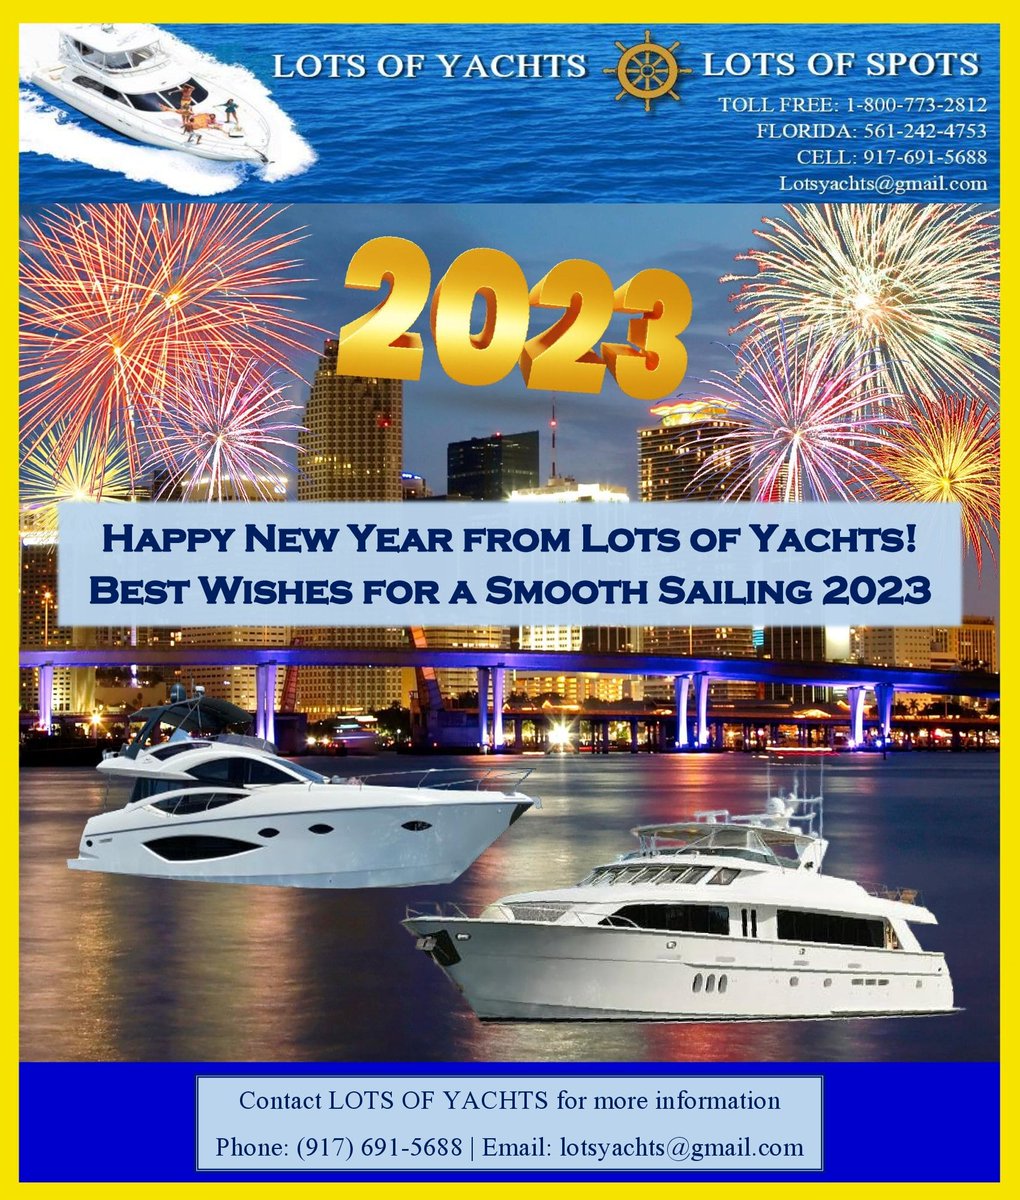 Happy New Year from Lots of Yachts!
#NewYear #newyear2023 #yachting #yachtcharter #boatrentals